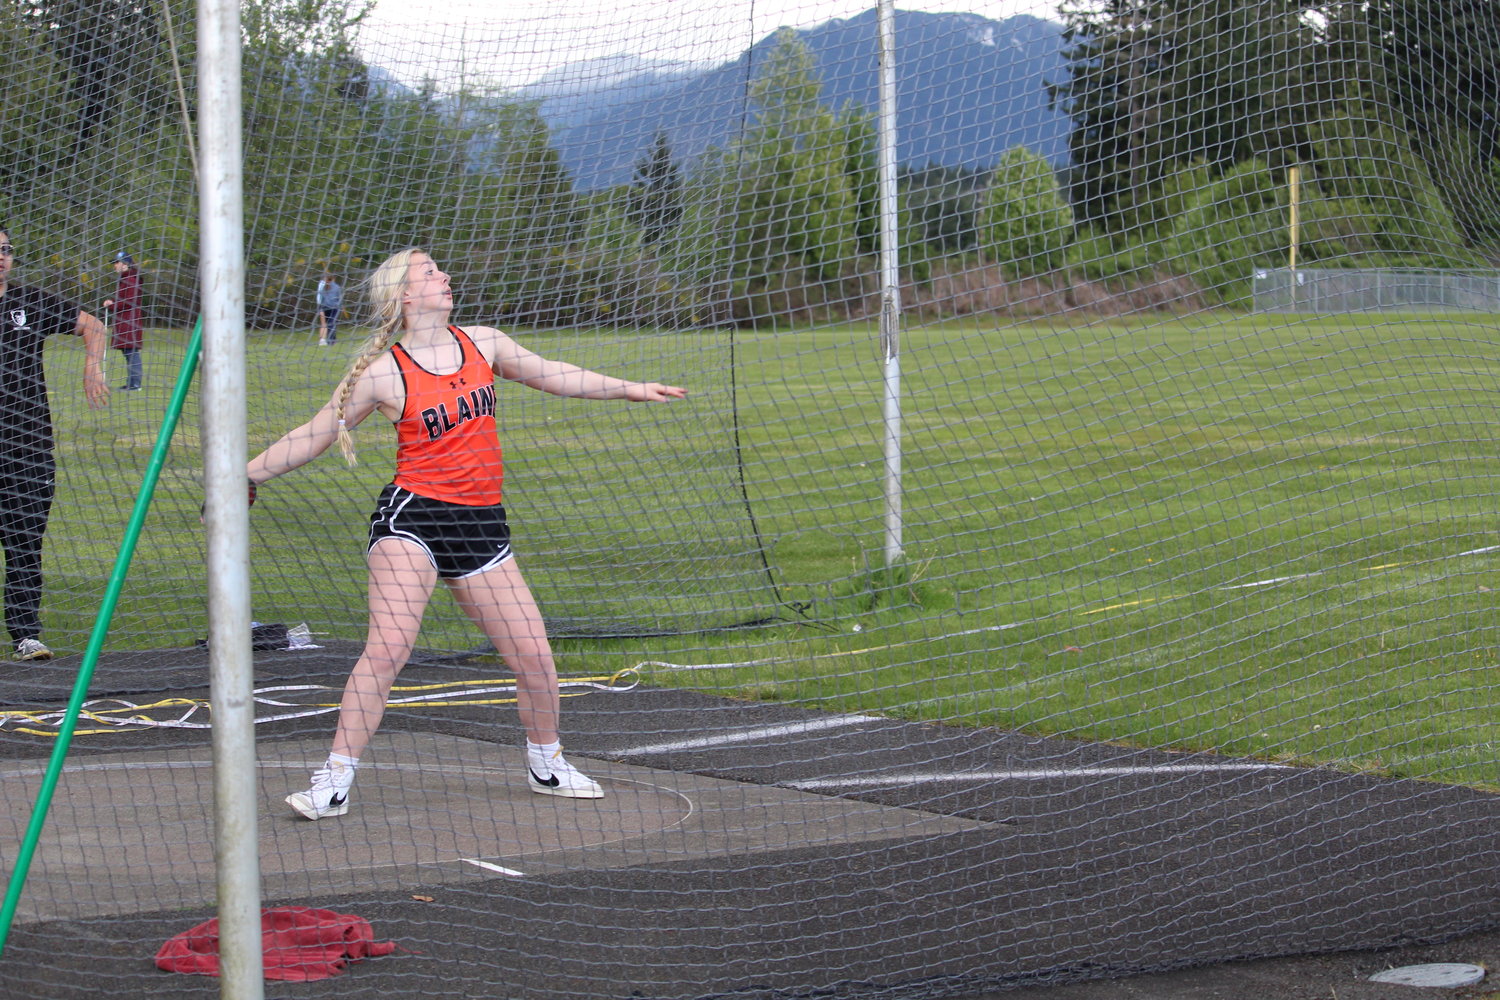 Deja Dube threw a personal record of 96’ 1” in the discus May 20 to take fourth and qualify for the state meet.